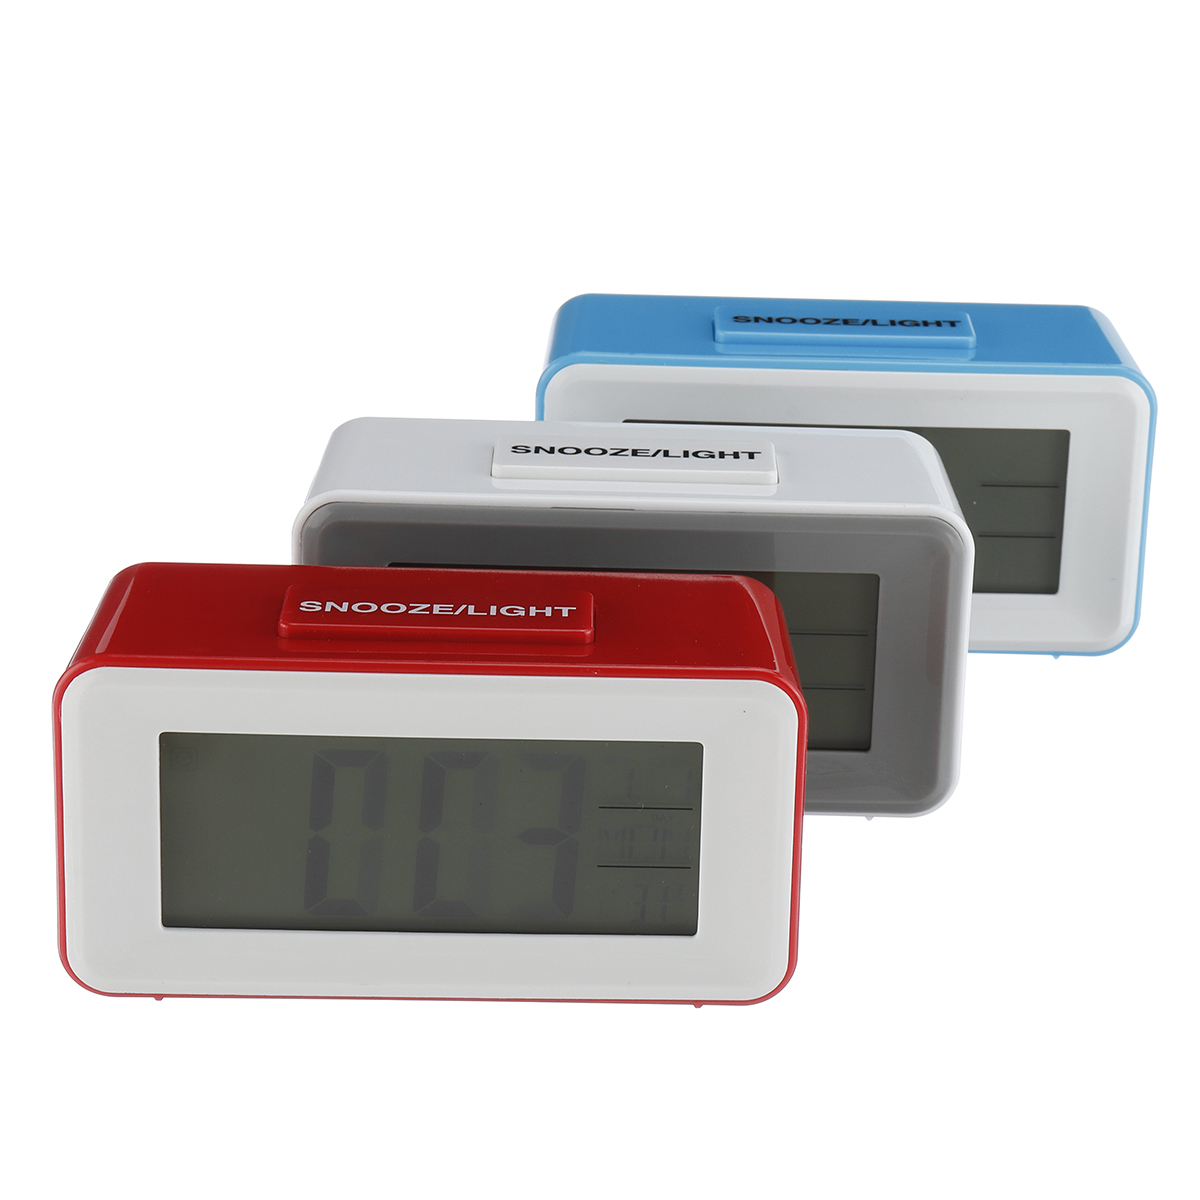 Backlight-LCD-Digital-Alarm-Clock-45quot32quot-Large-Display-Night-Light-with-Calendar-Thermometer-E-1760102-9